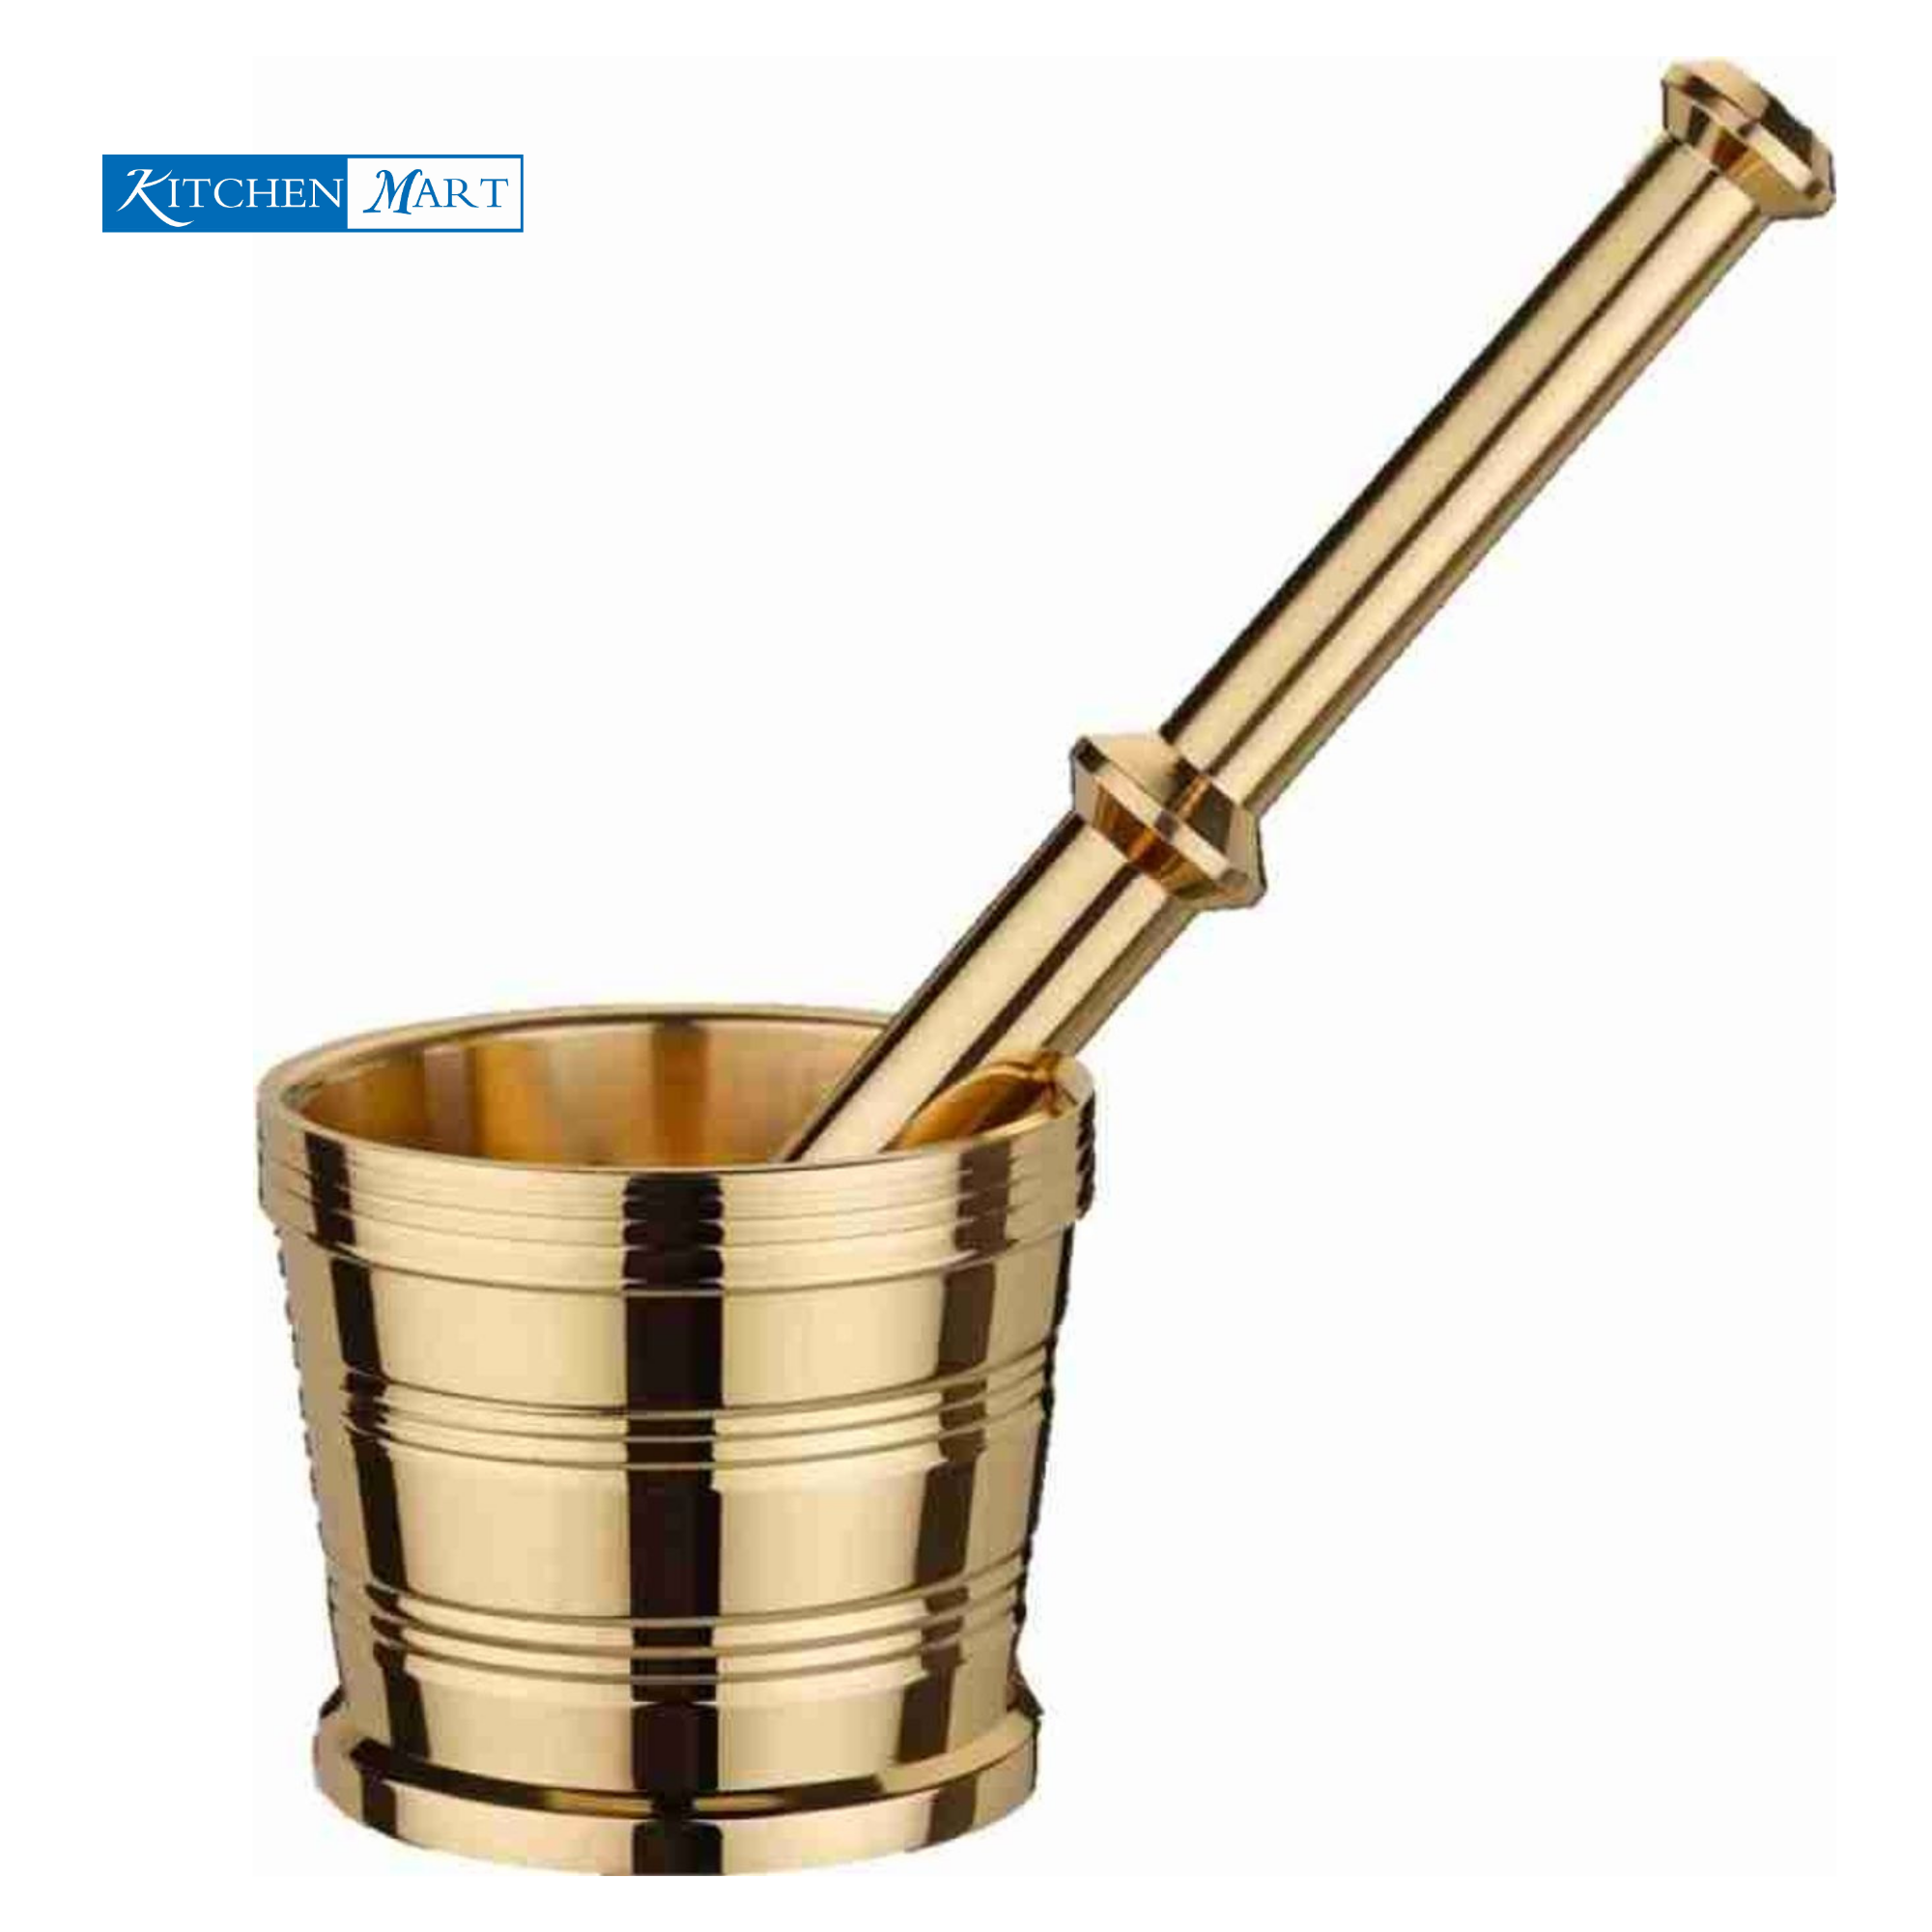 Hallmark Traditional Brass Mortar and Pestle - A Blend of Timeless Craftsmanship and Culinary Excellence